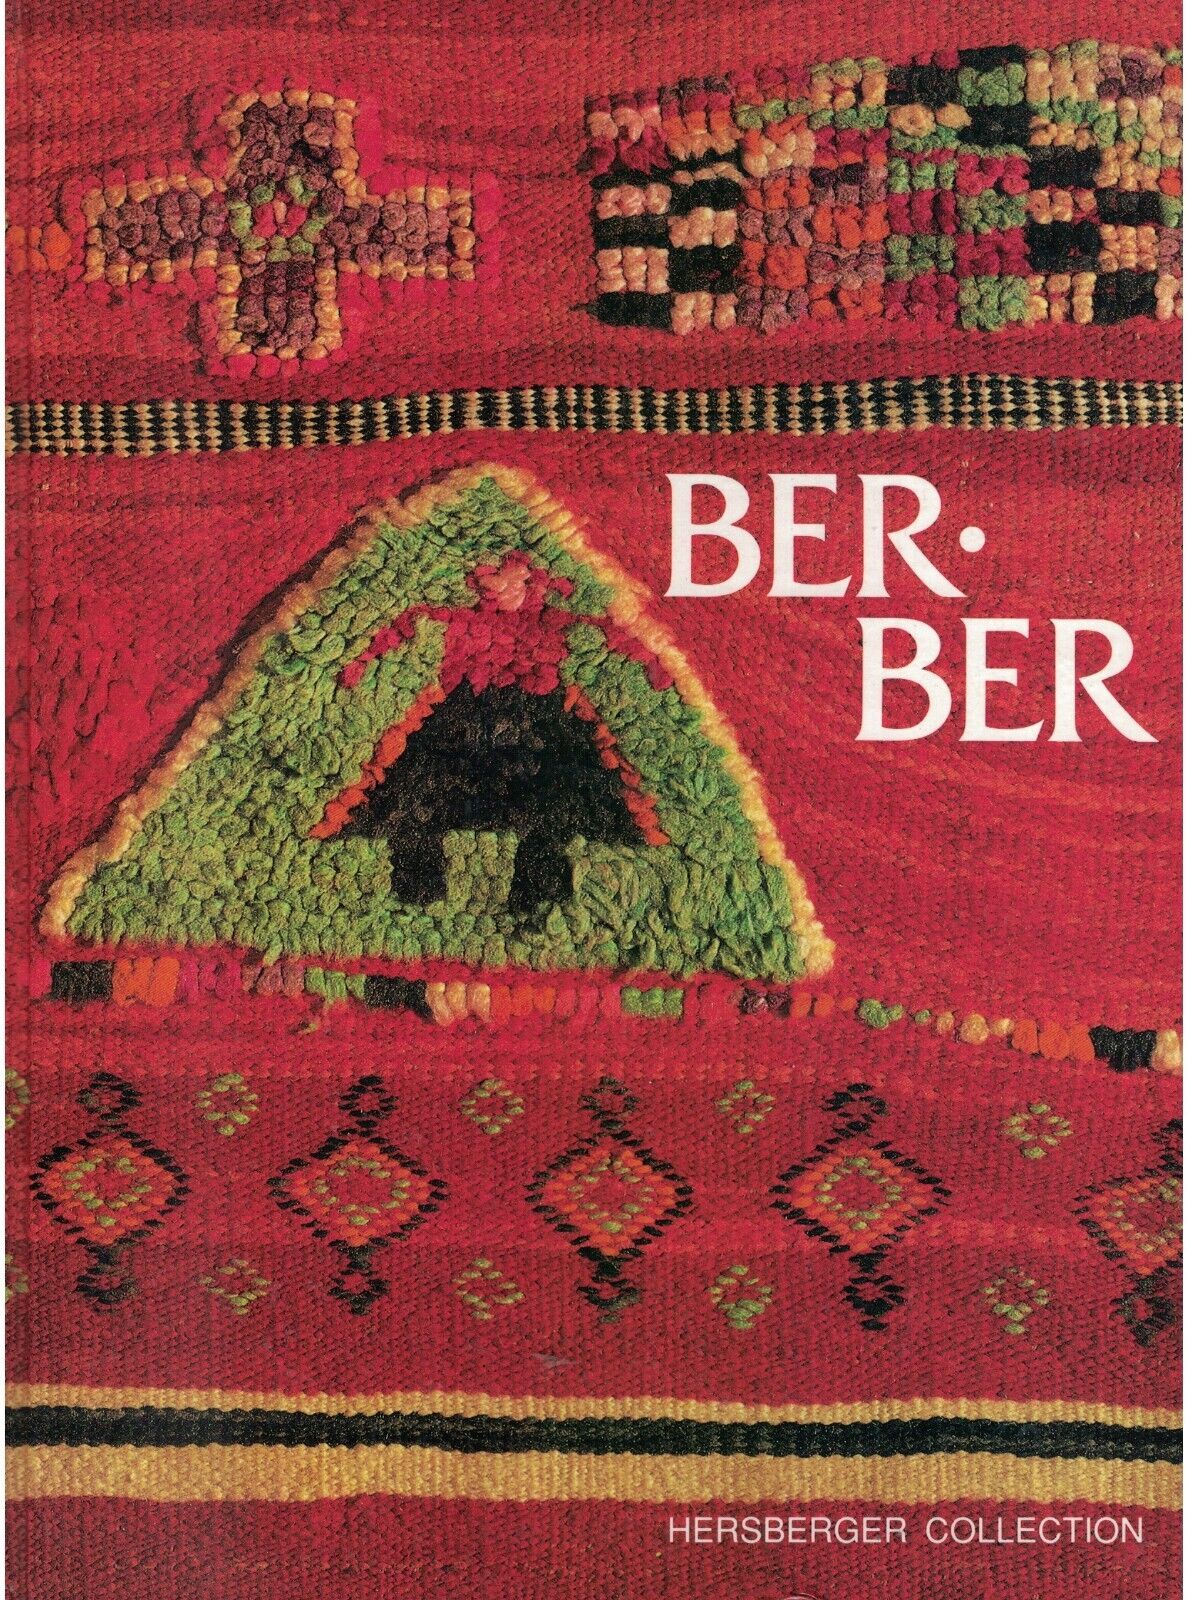 BOOK: Berber: Tribal Carpets and Weavings from Morocco by Stanzer. Uncommon.